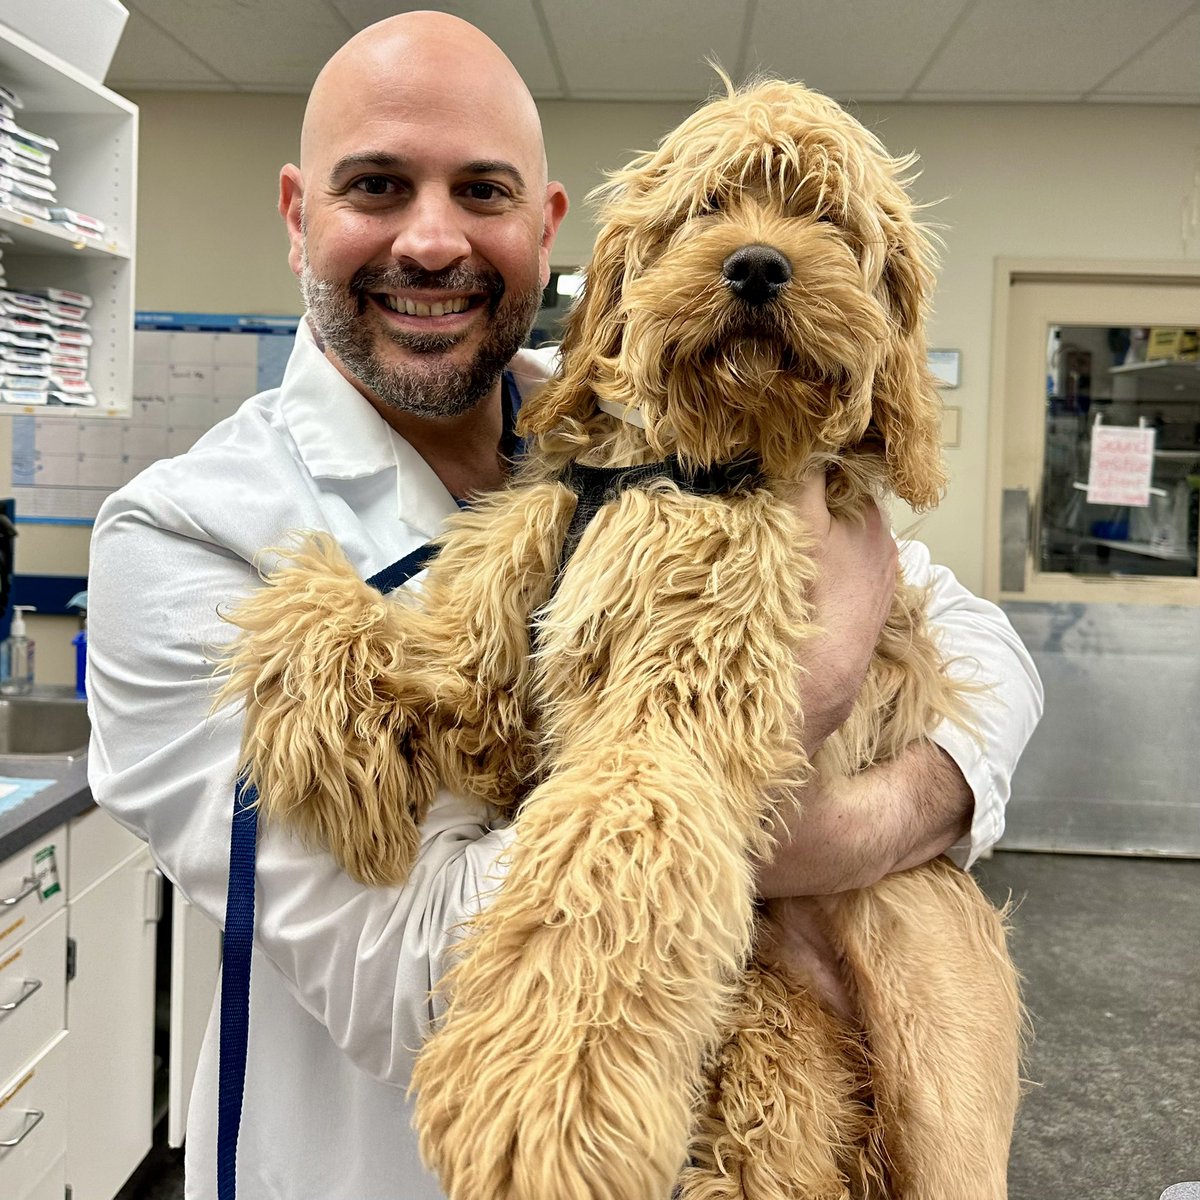 This is Floyd!  He had a common femur fracture that happens in puppies, where they break the growth plate near the knee. We fixed him up and he’s ready to roll! #medvet #veterinarysurgery #veterinarysurgeon #medvetcincinnati #acvs #cincinnati #cincypet #dogsofcincy #petcare